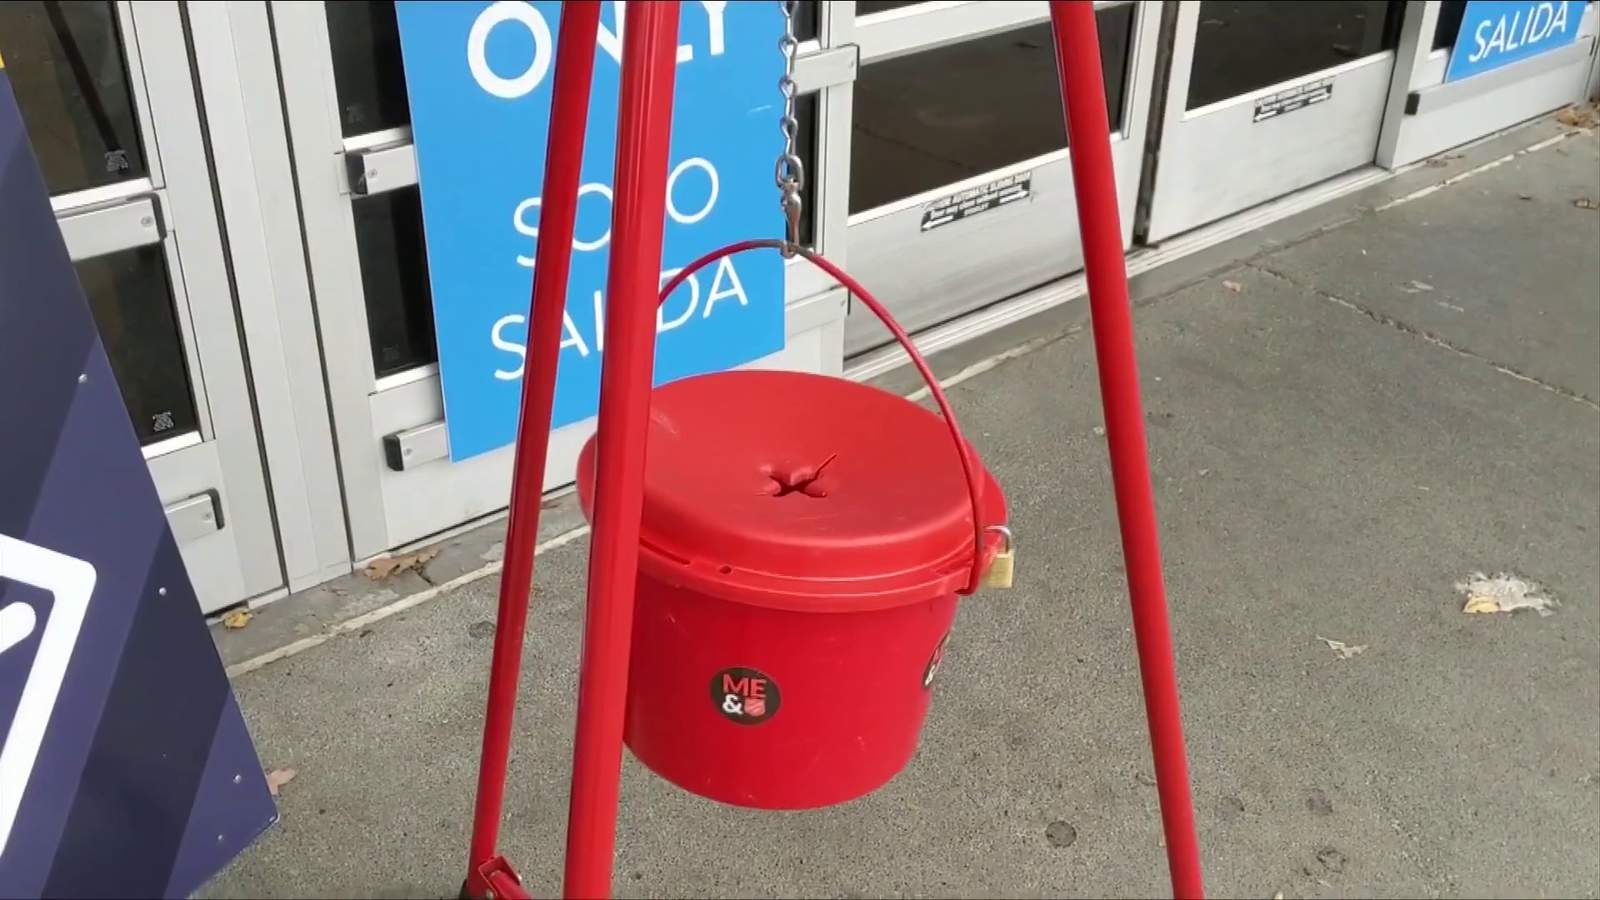 Salvation Army says Red Kettle donations down 83%